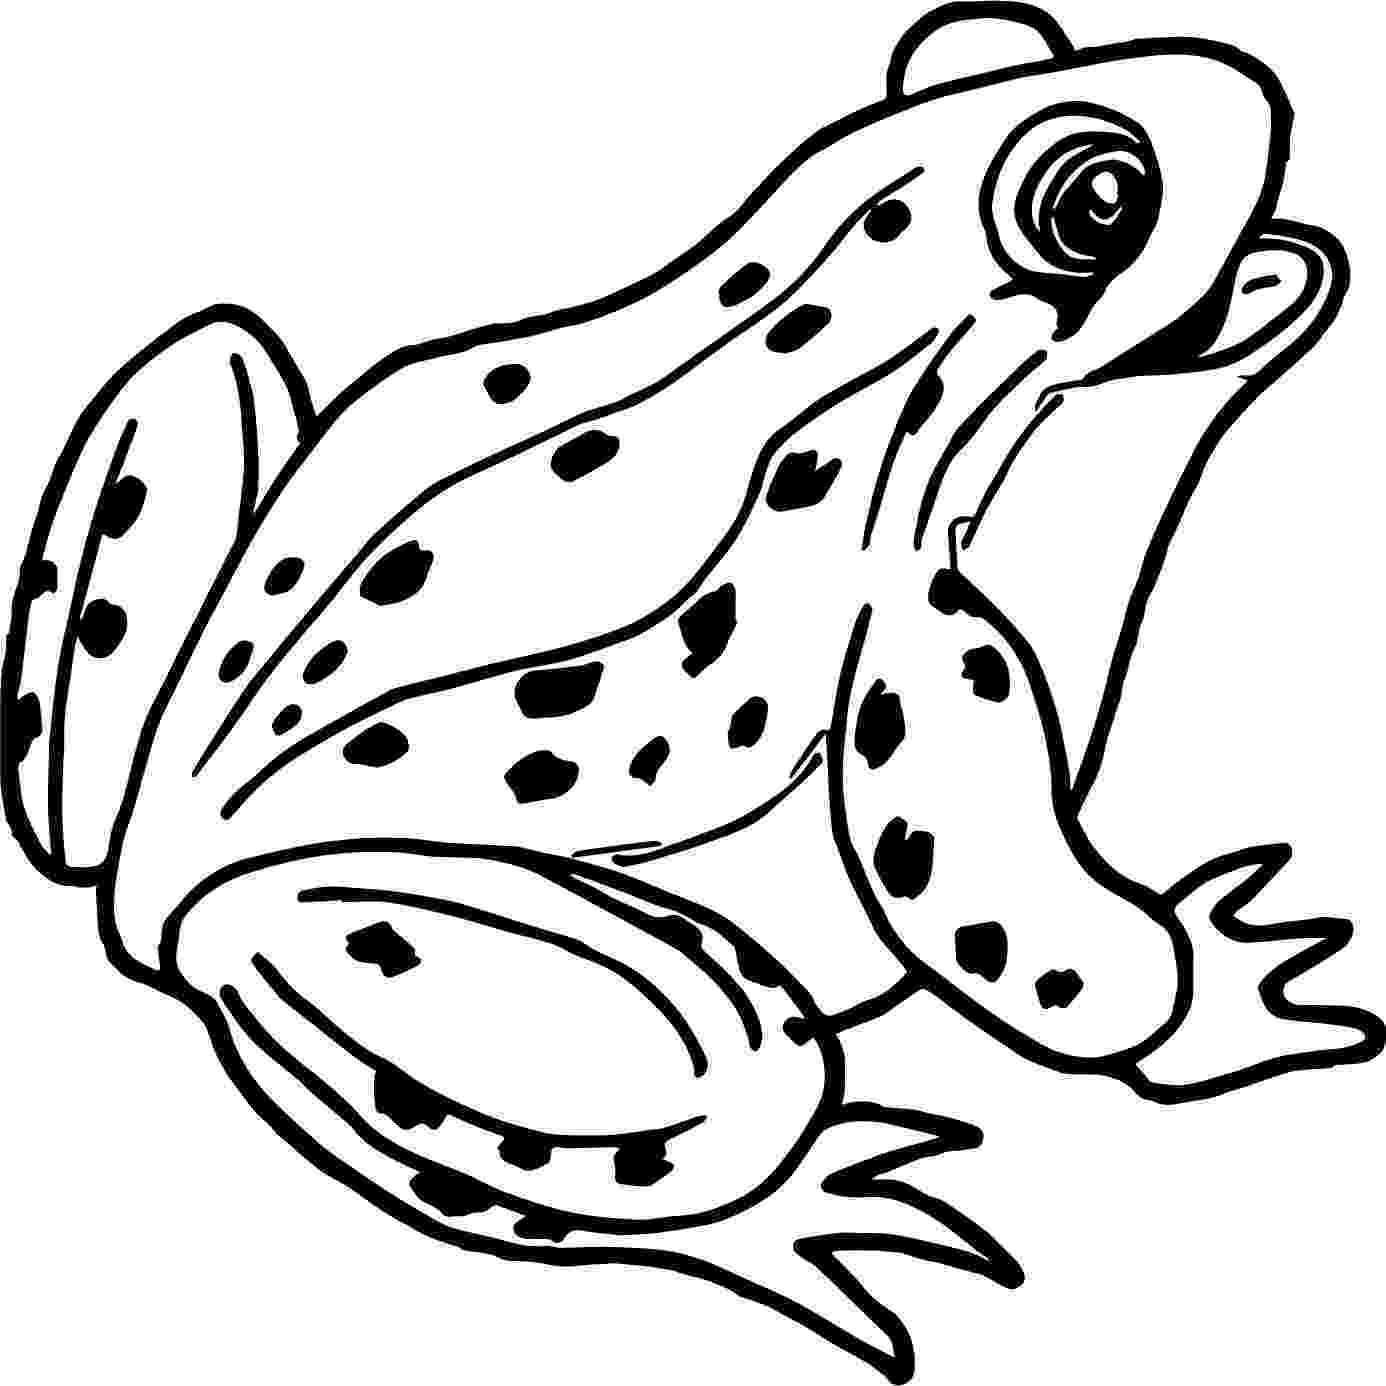 frogs coloring pages free printable frog coloring pages for kids frogs coloring pages 1 1